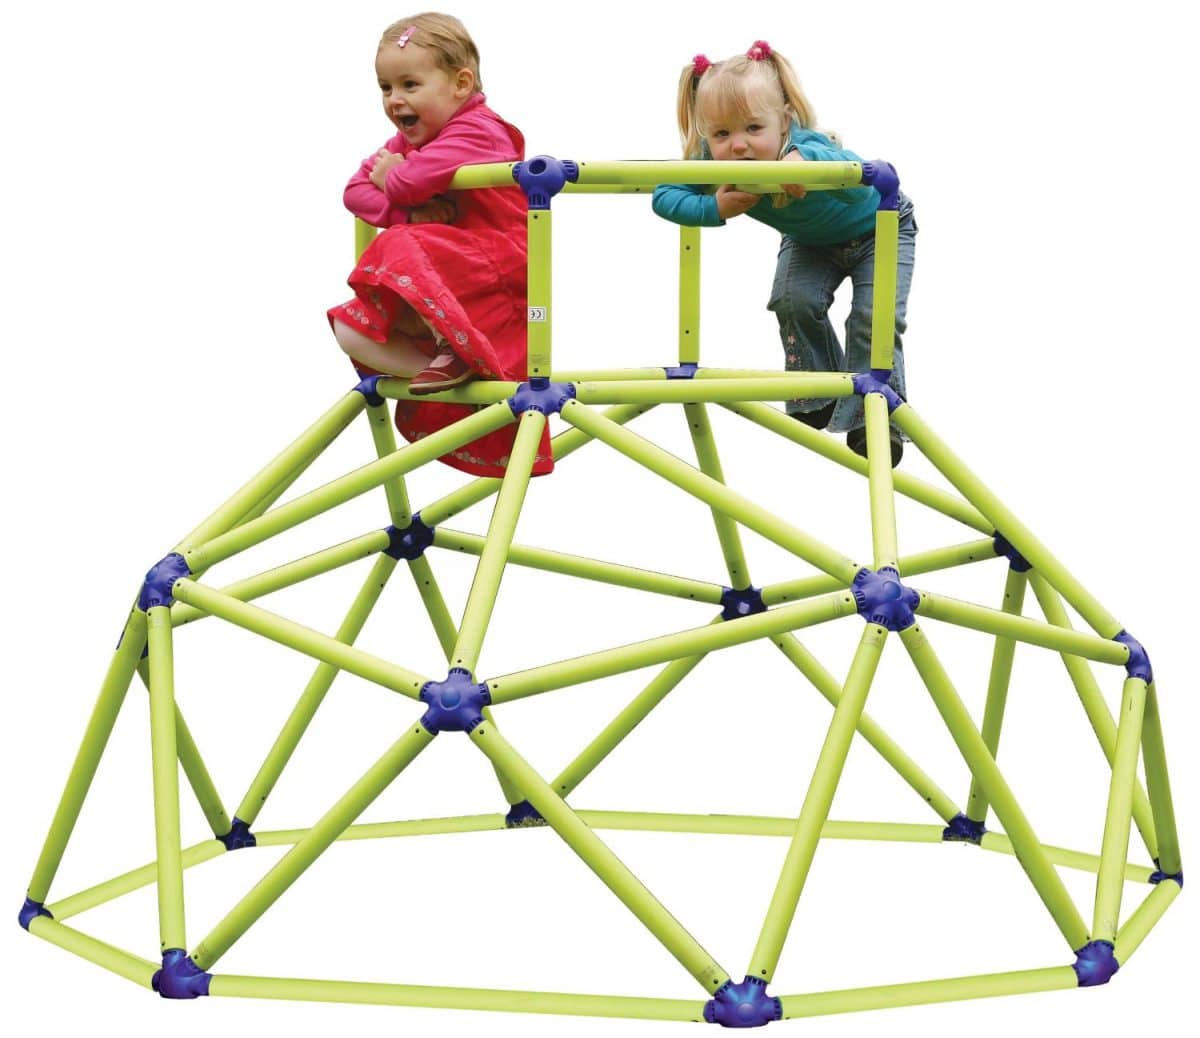 Best Climbing Toys for Kids & Toddlers to Buy 2019 - LittleOneMag